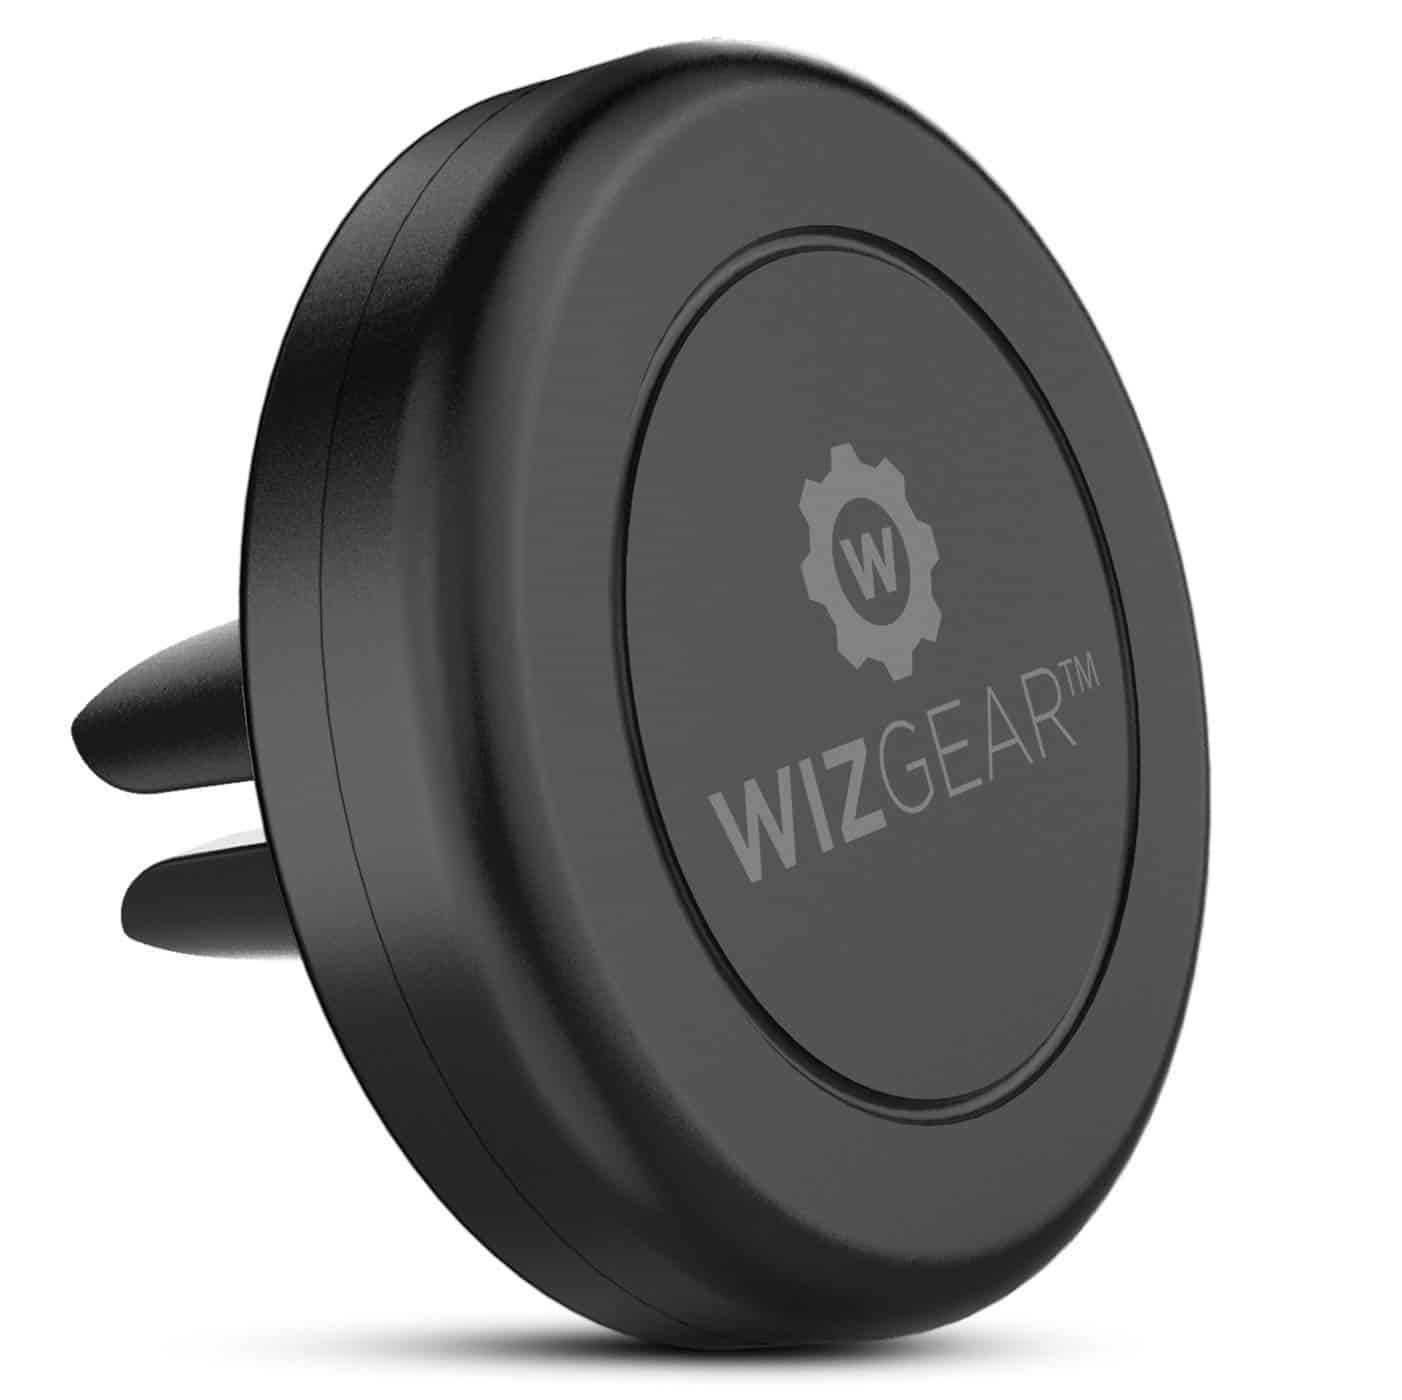 WizGear Universal Air Vent Magnetic